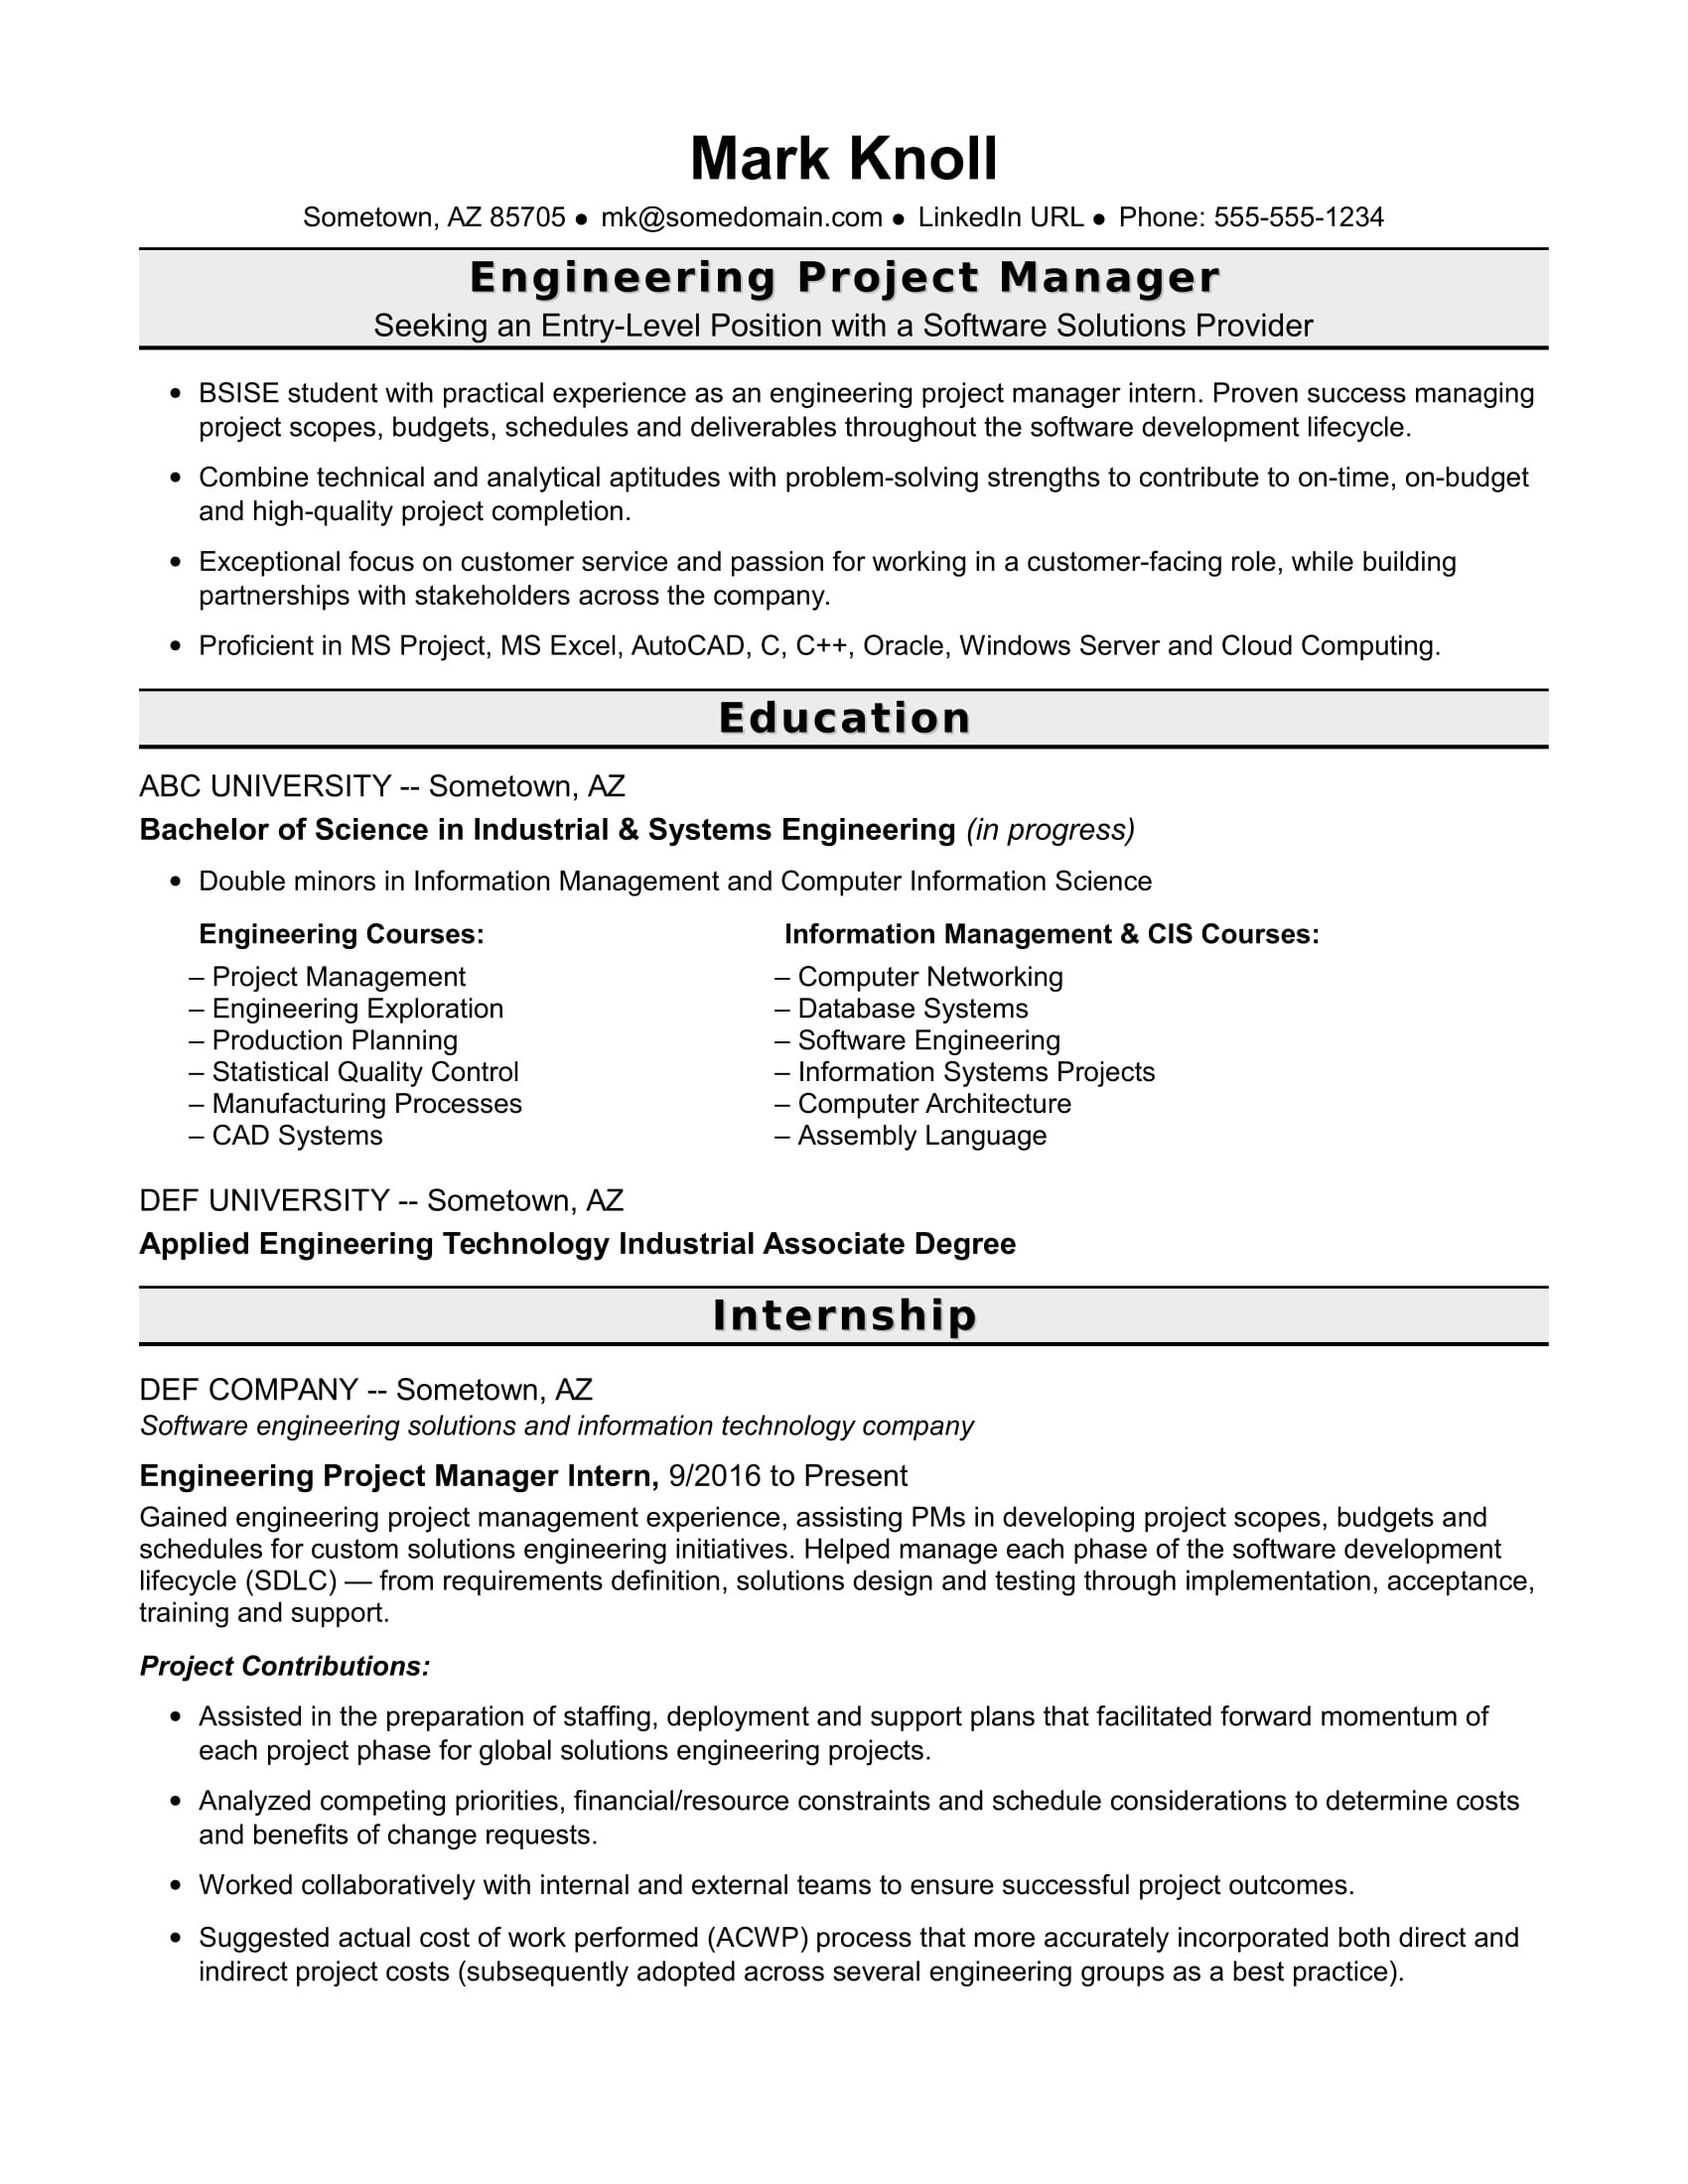 Sample Resume for It Manager Position Entry-level Project Manager Resume for Engineers Monster.com